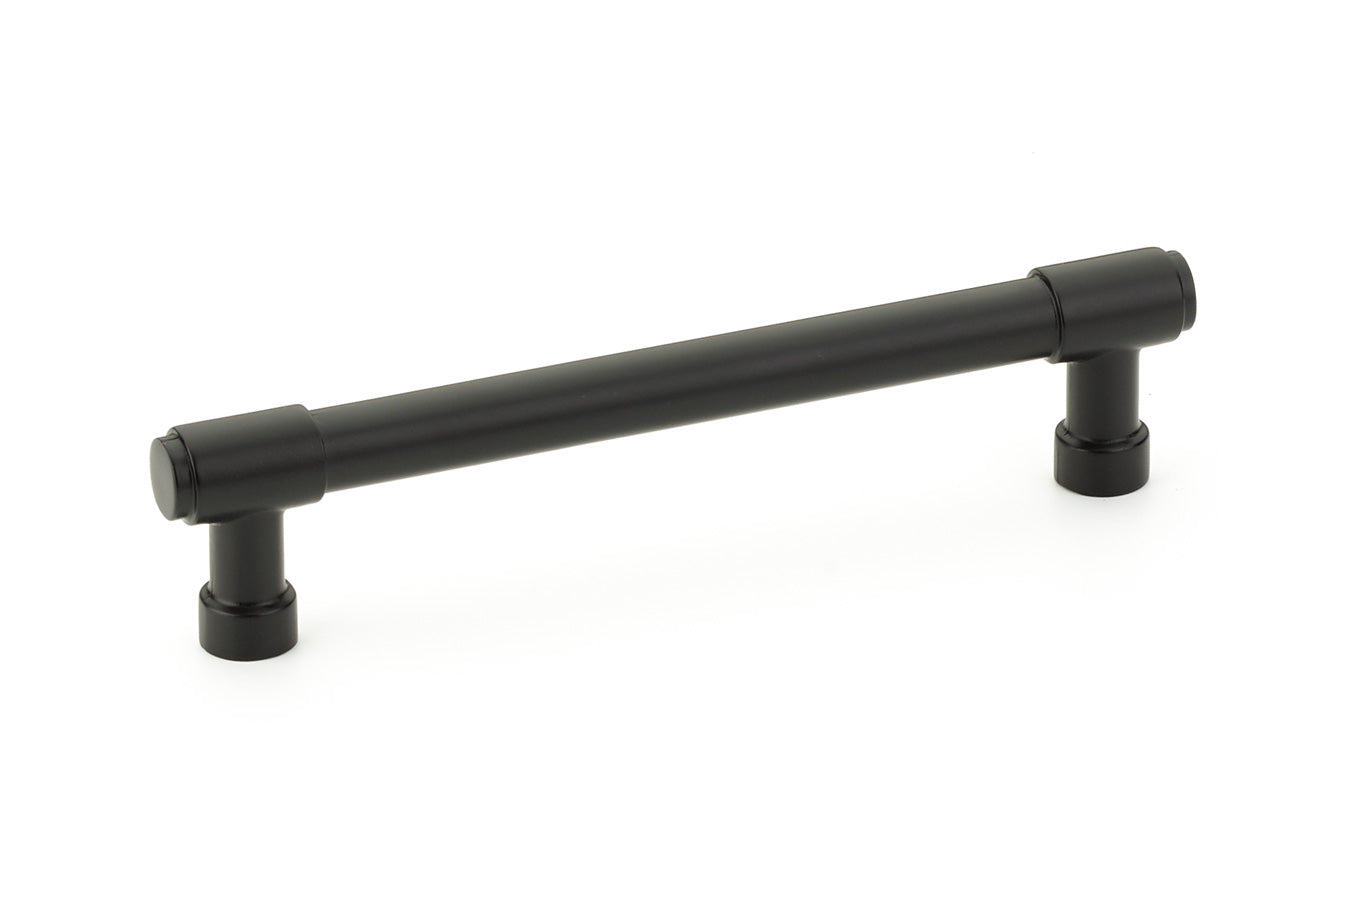 Flat Black "Industry" Cabinet Knobs and Drawer Pulls - Industry Hardware